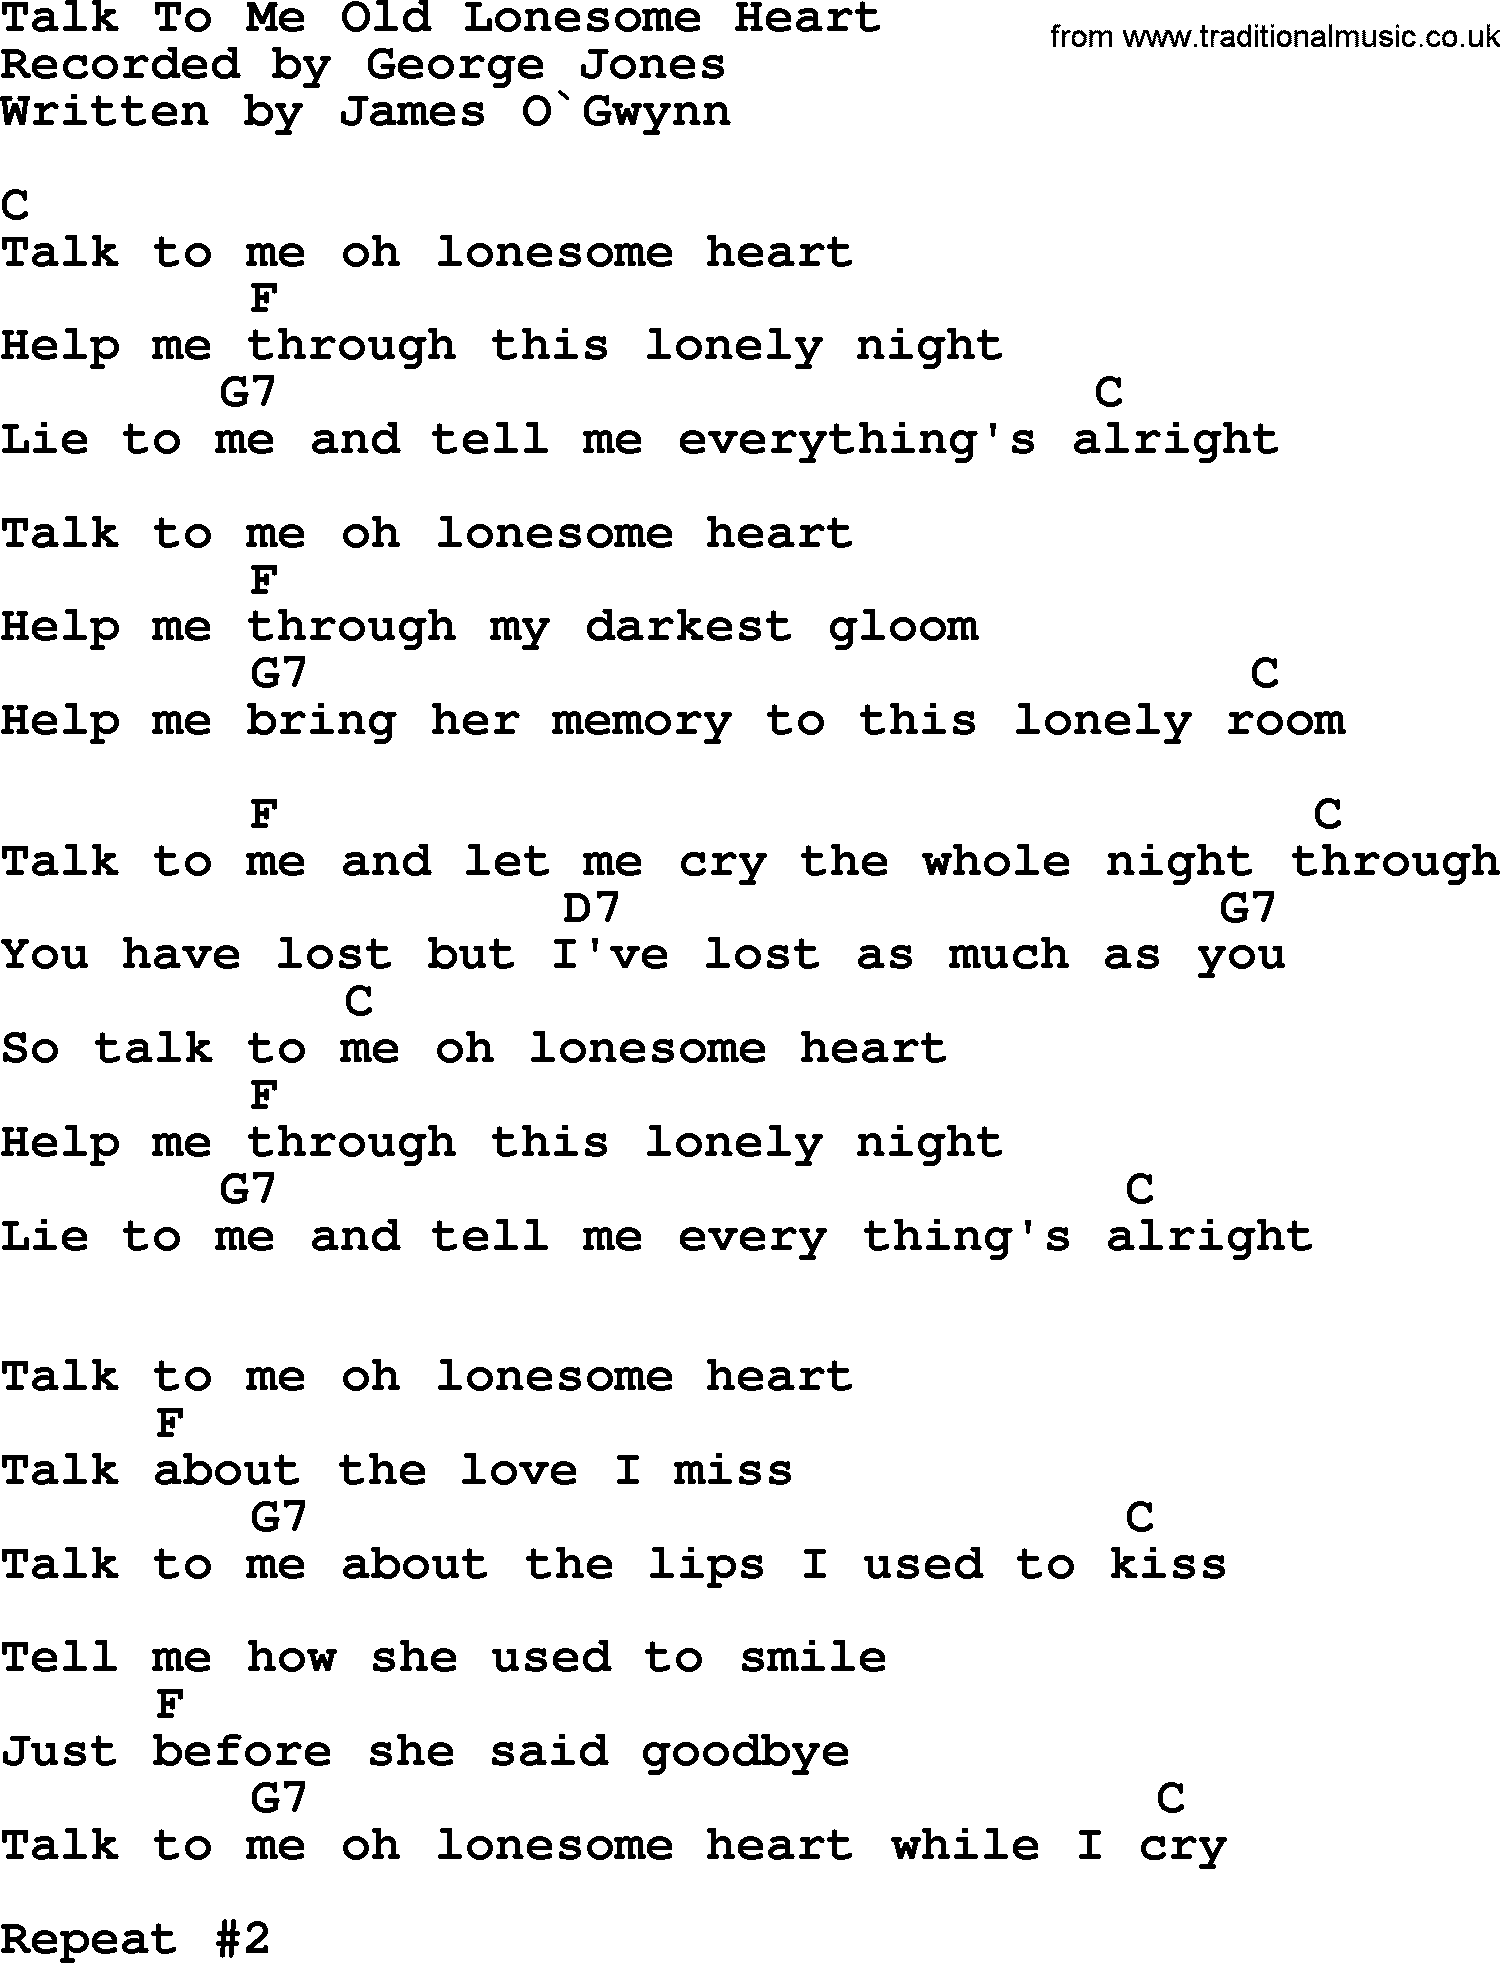 George Jones song: Talk To Me Old Lonesome Heart, lyrics and chords